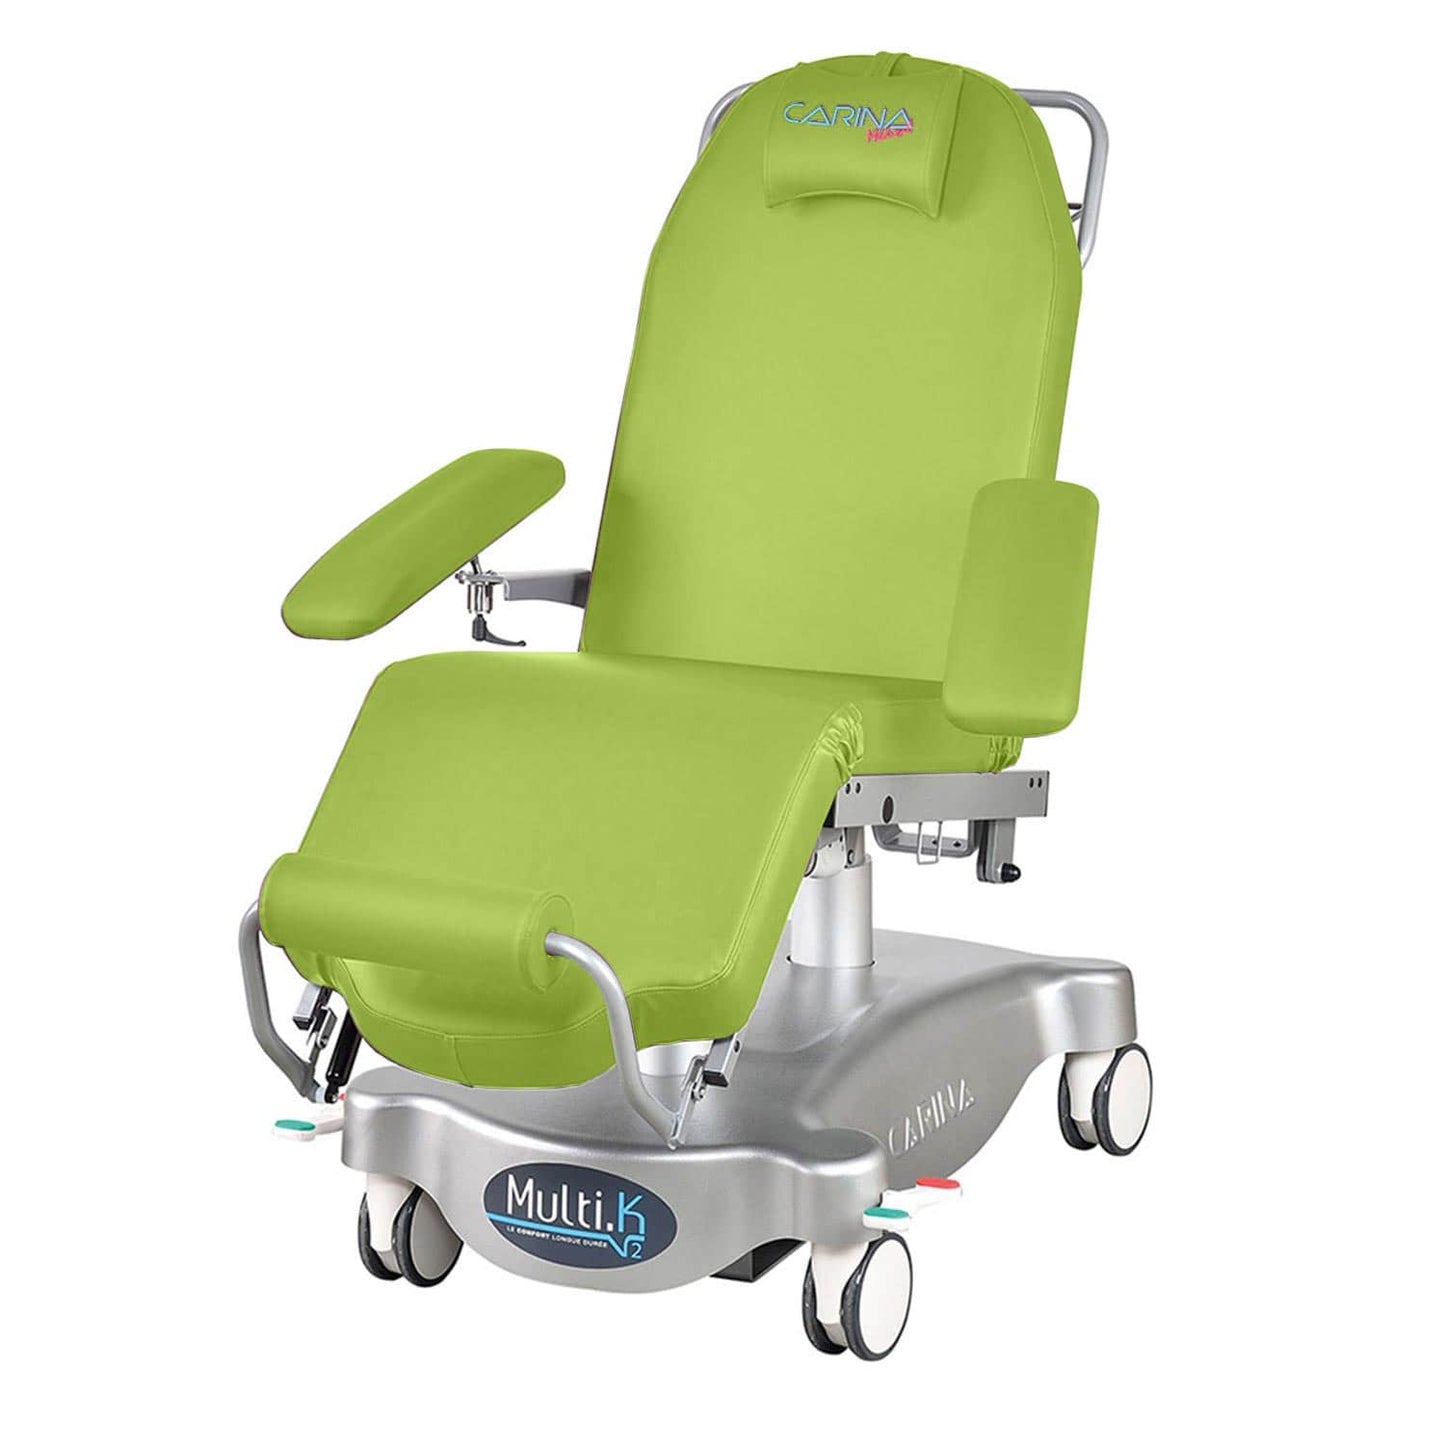 Multifunctional Treatment Chair With Soft Memory Upholstery And Hand-Held Remote Control